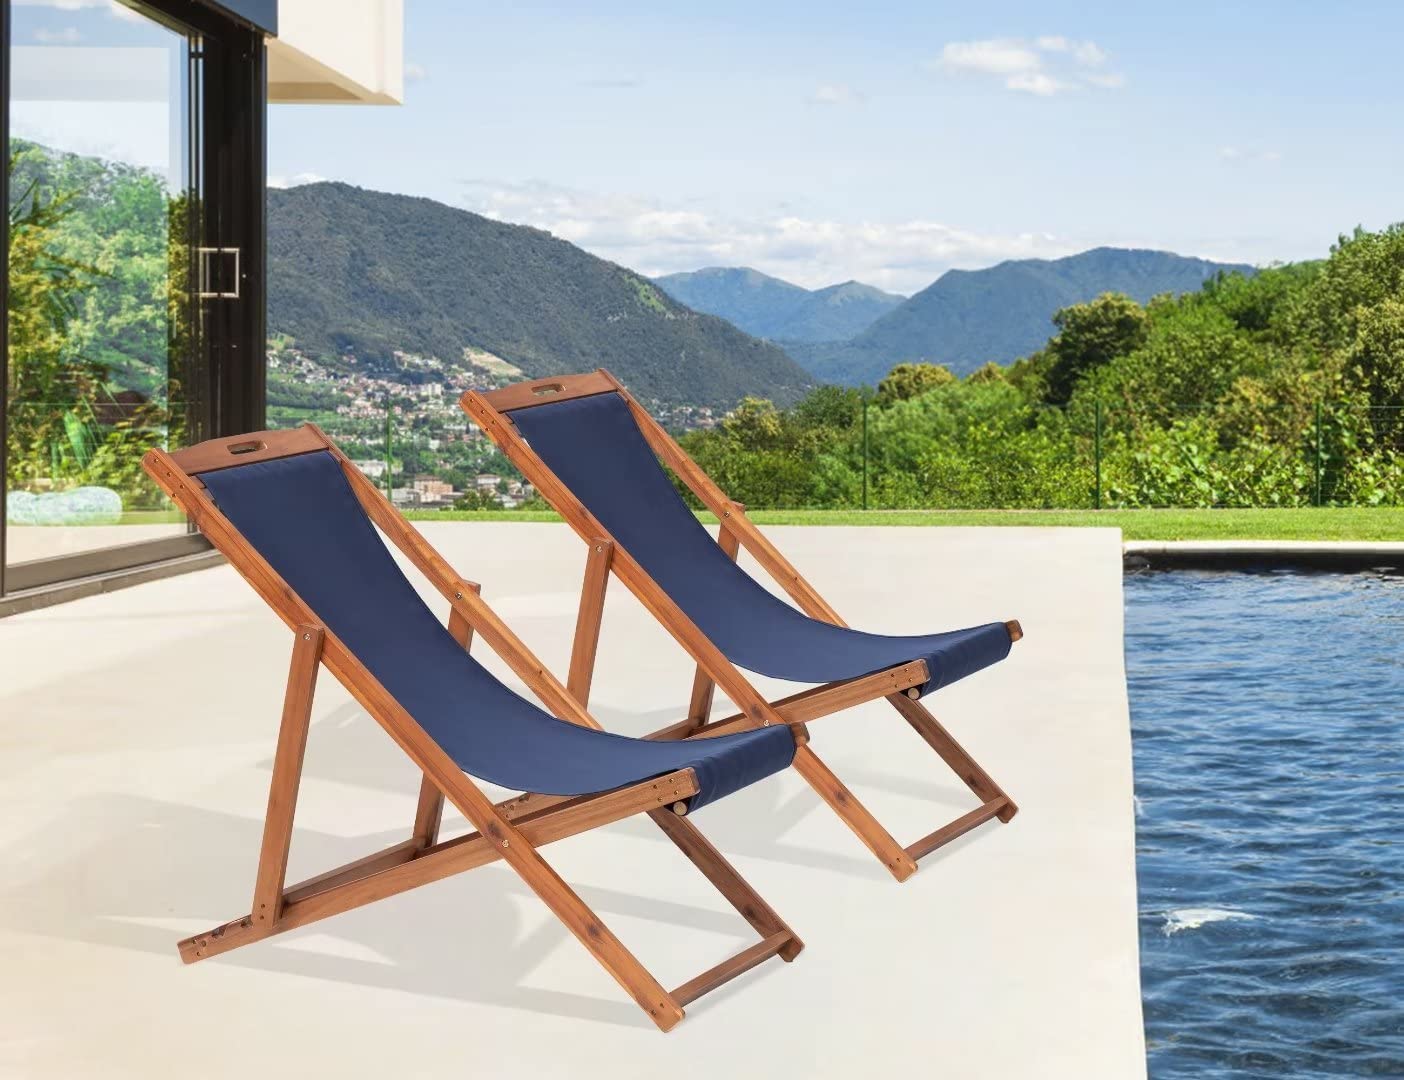 Beach Sling Chair Set of 2,  Adjustable Reclining Beach Chair  Outdoor Foldable Lounge Chairs for Garden, Backyard, Poolside, Balcony (Blue) - image 1 of 7